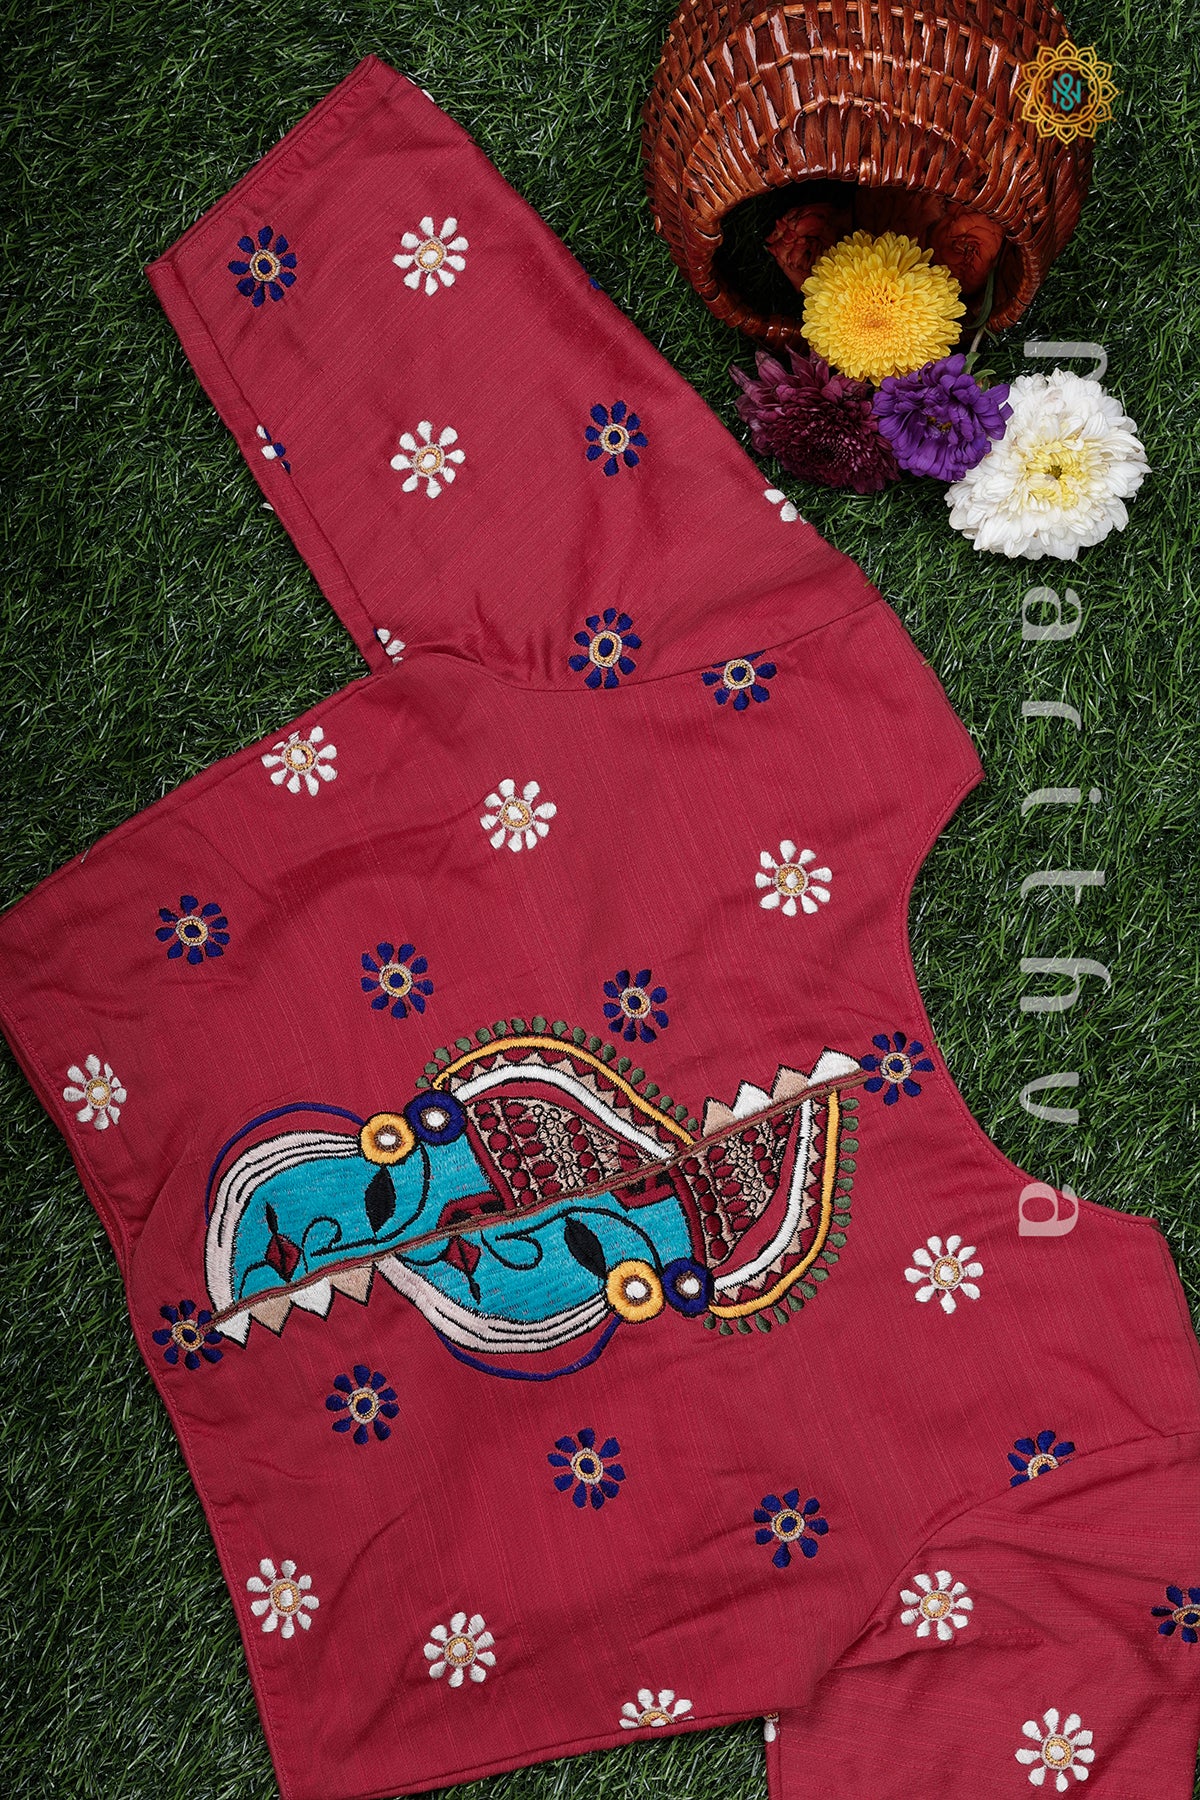 PINK - READYMADE COTTON BLOUSE WITH HAND EMBROIDERY DESIGN